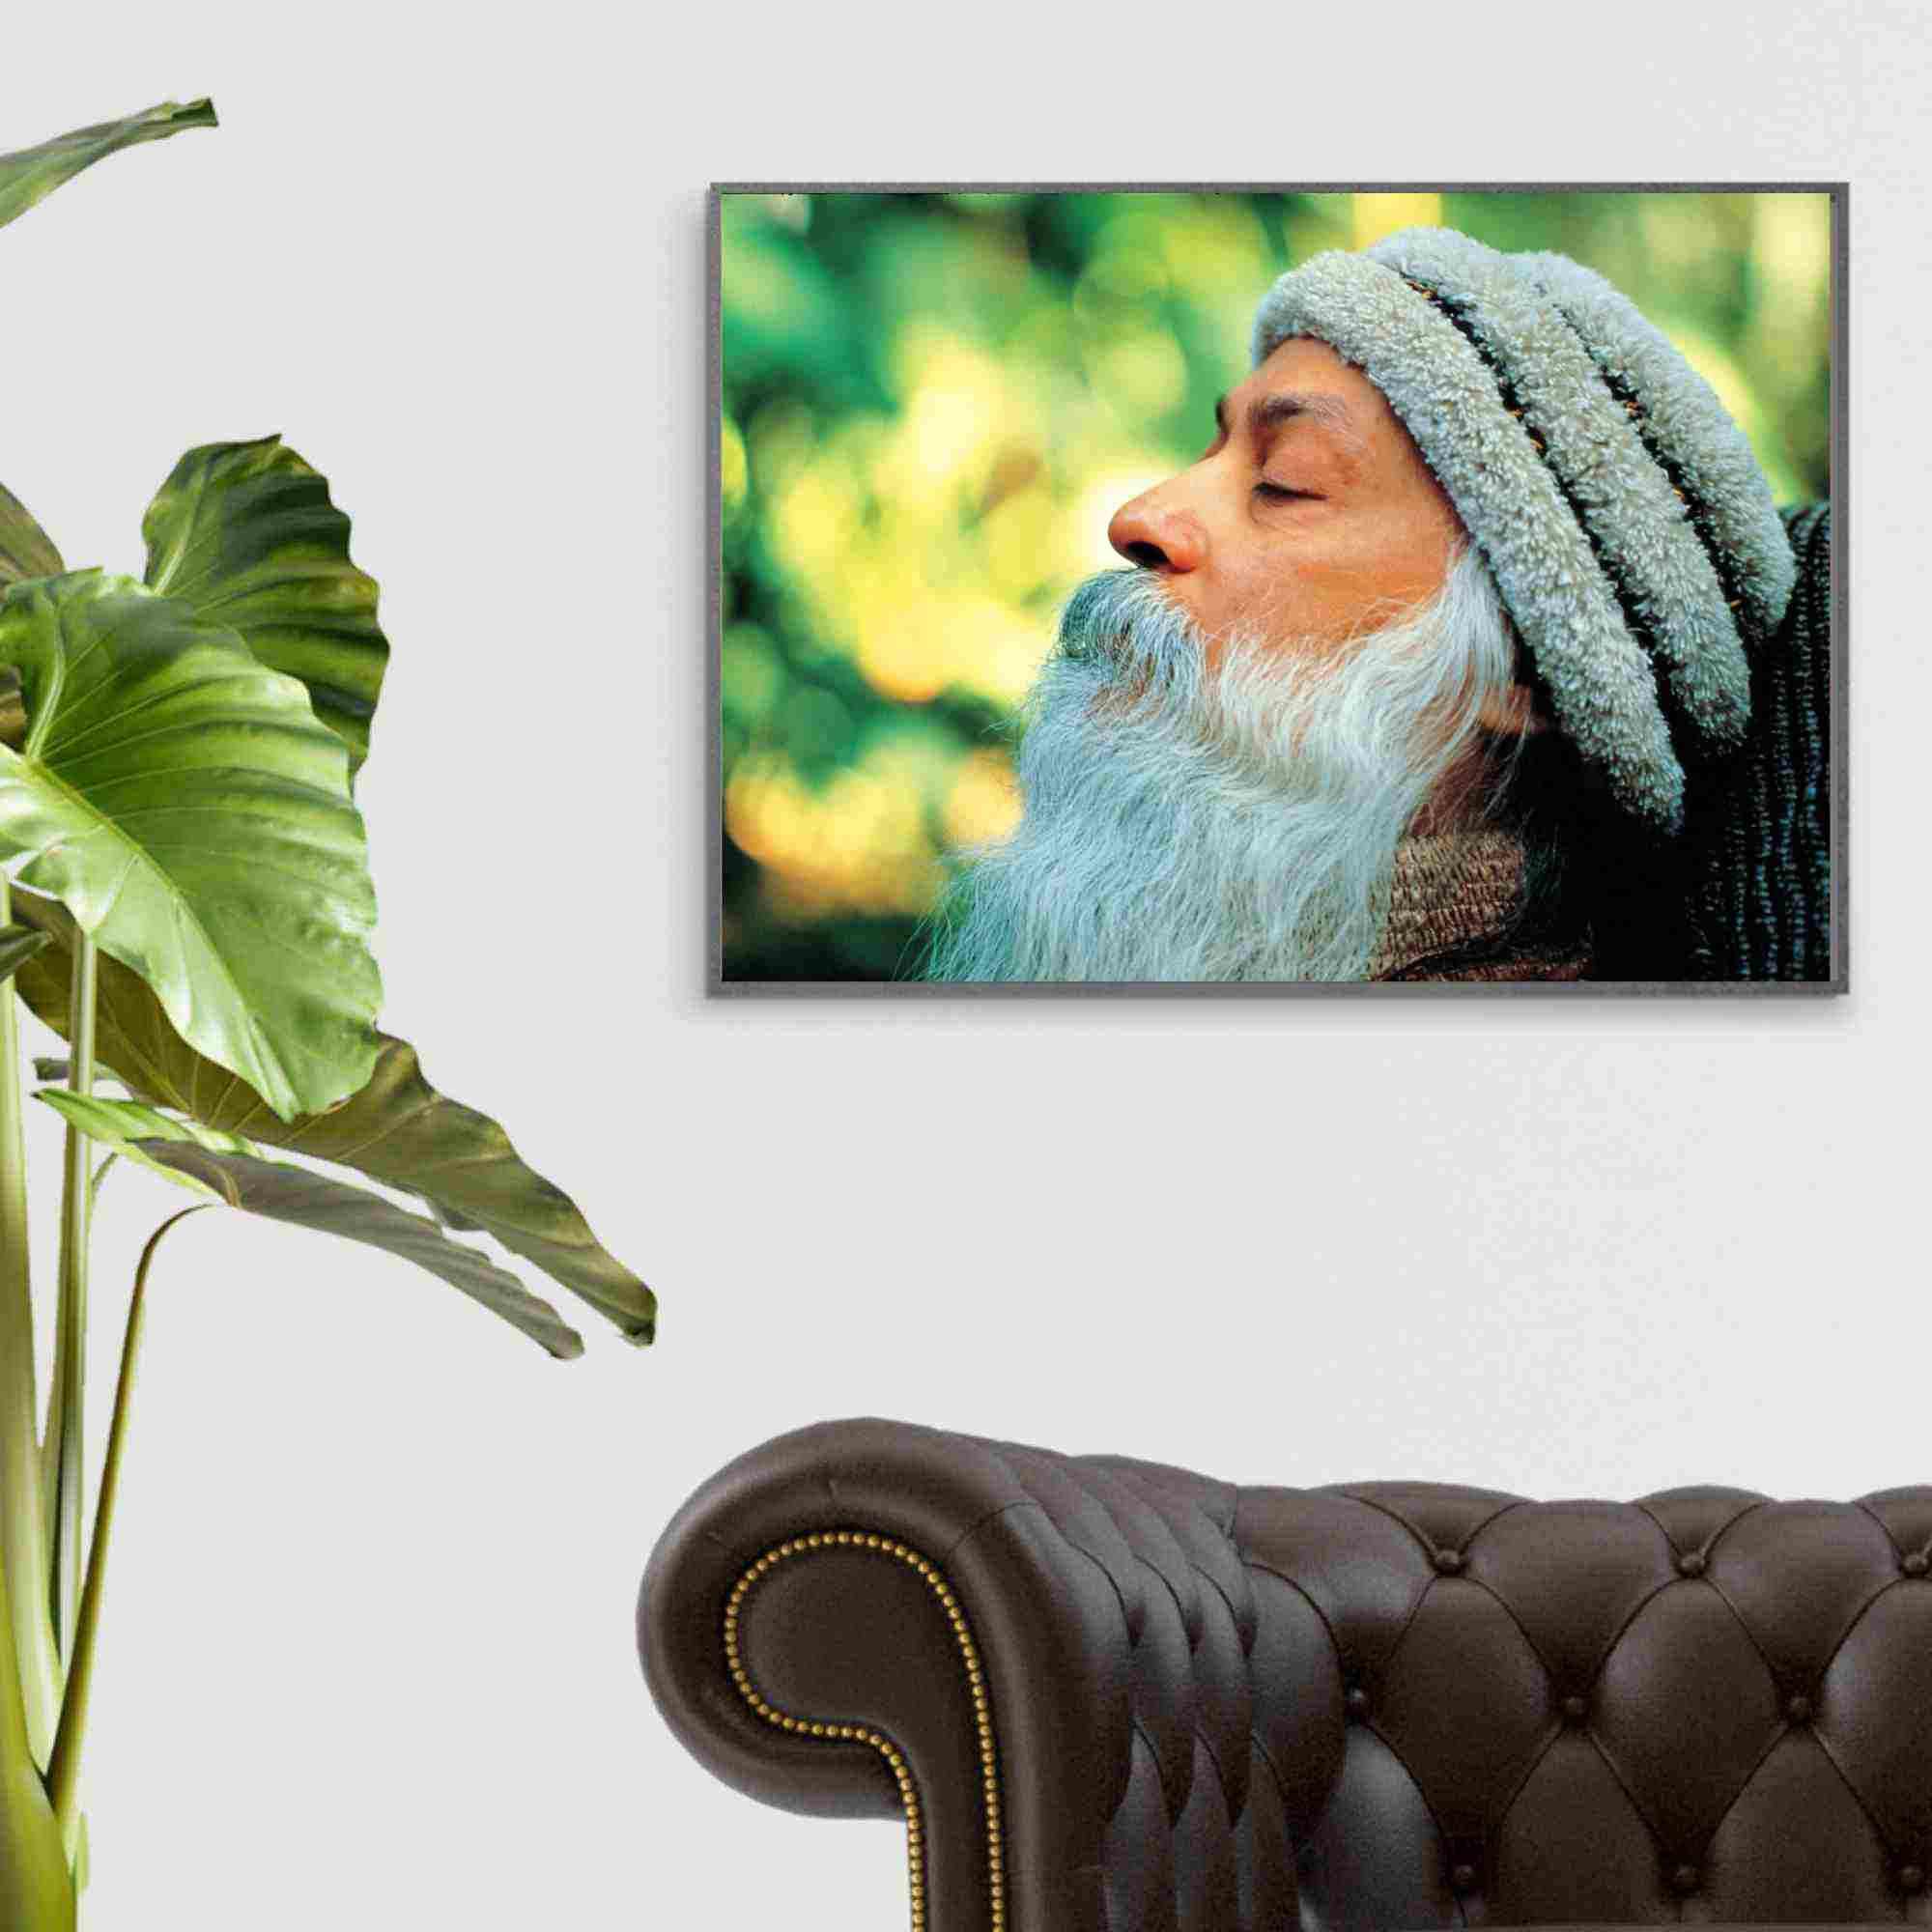 osho posters